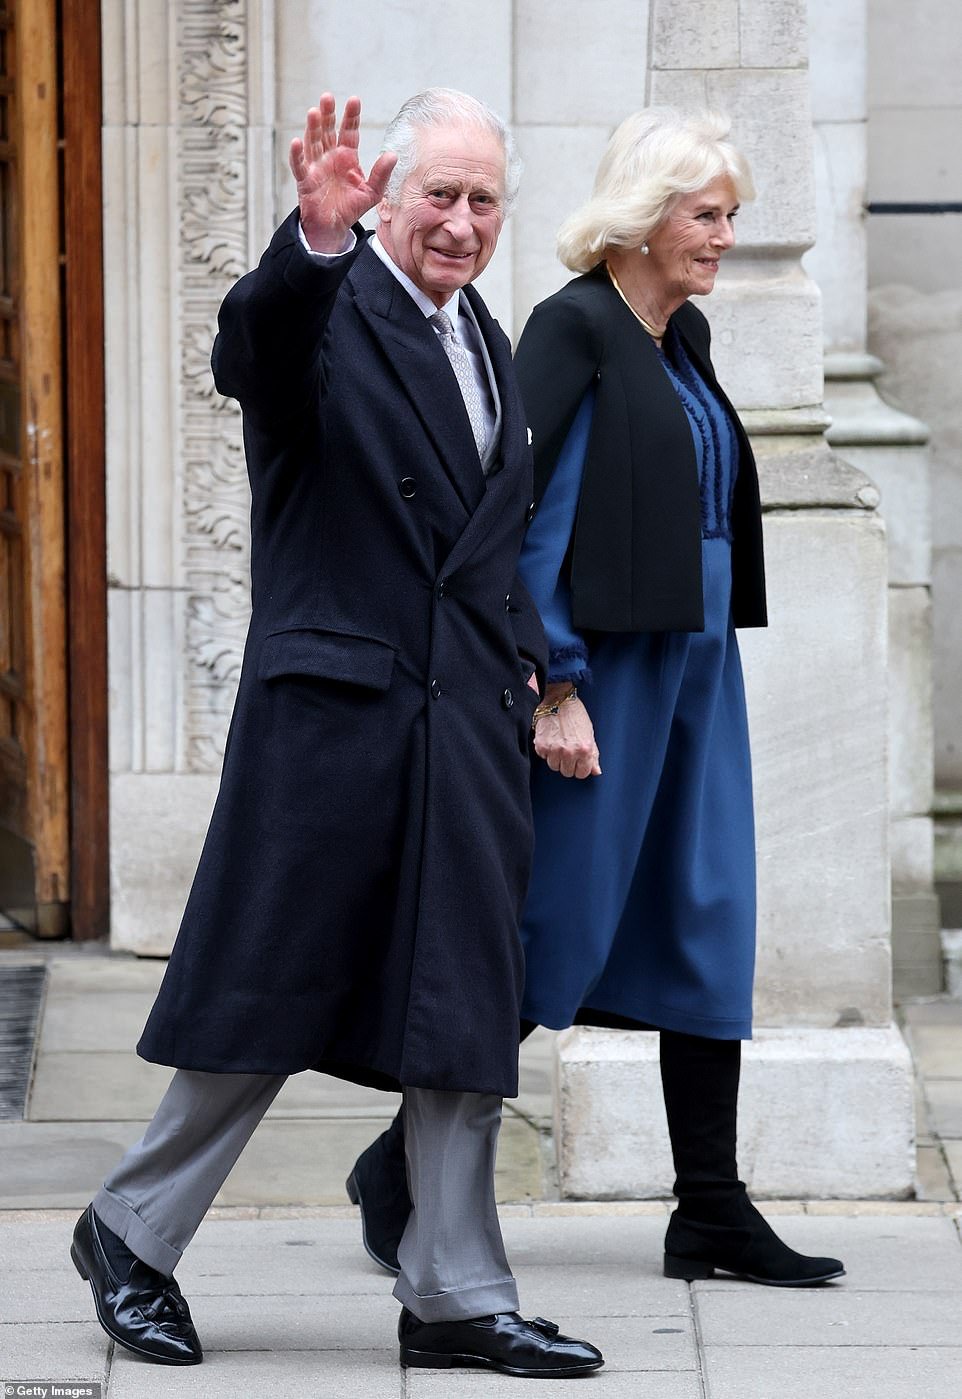 King Charles III leaves with Queen Camilla after undergoing treatment for an enlarged prostate at the London Clinic on January 29.  The Monarch would later reveal he has cancer - but today there is good news as he is cleared by doctors to return to public life.  duties - but not everything is clear yet